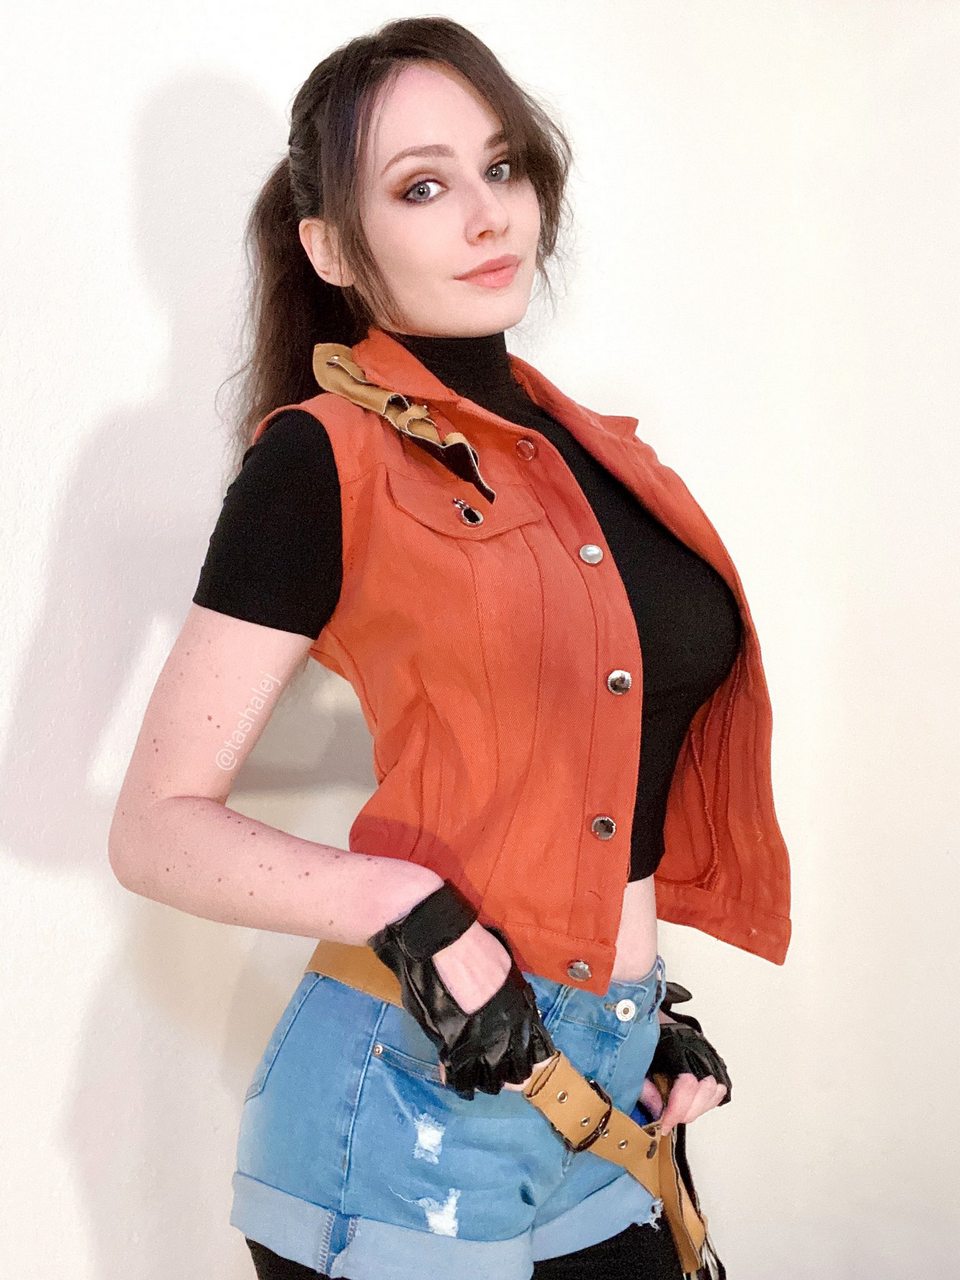 Claire Redfield By Tashale